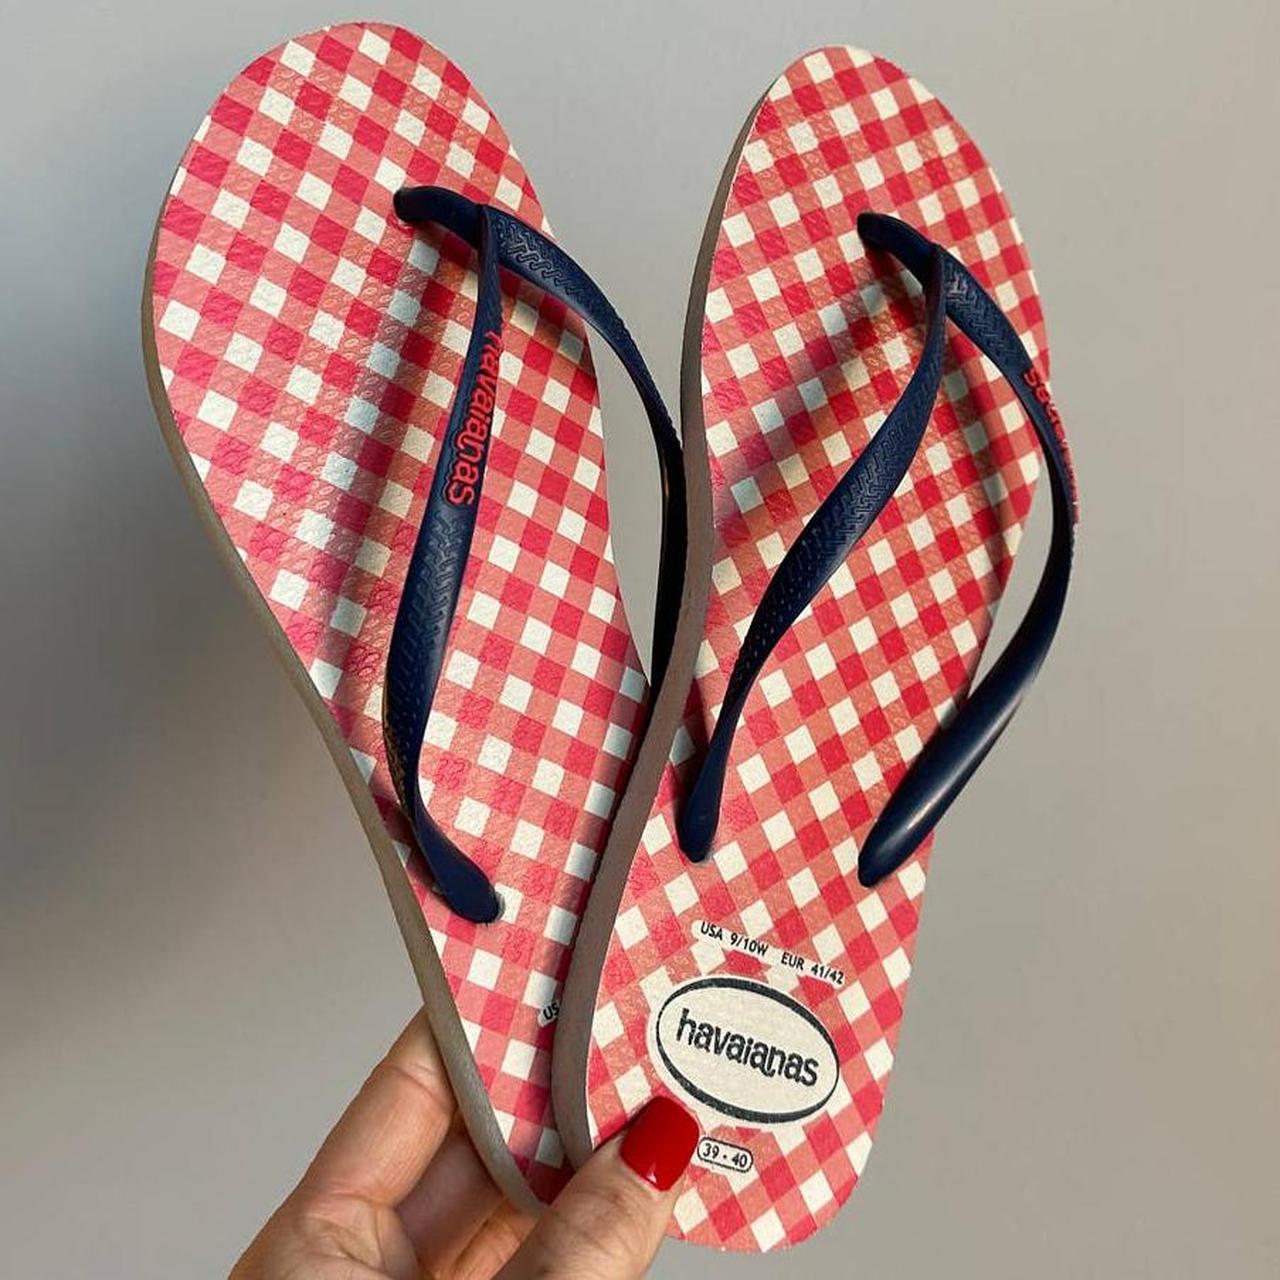 Havaianas Women's Red and White Flipflops (2)